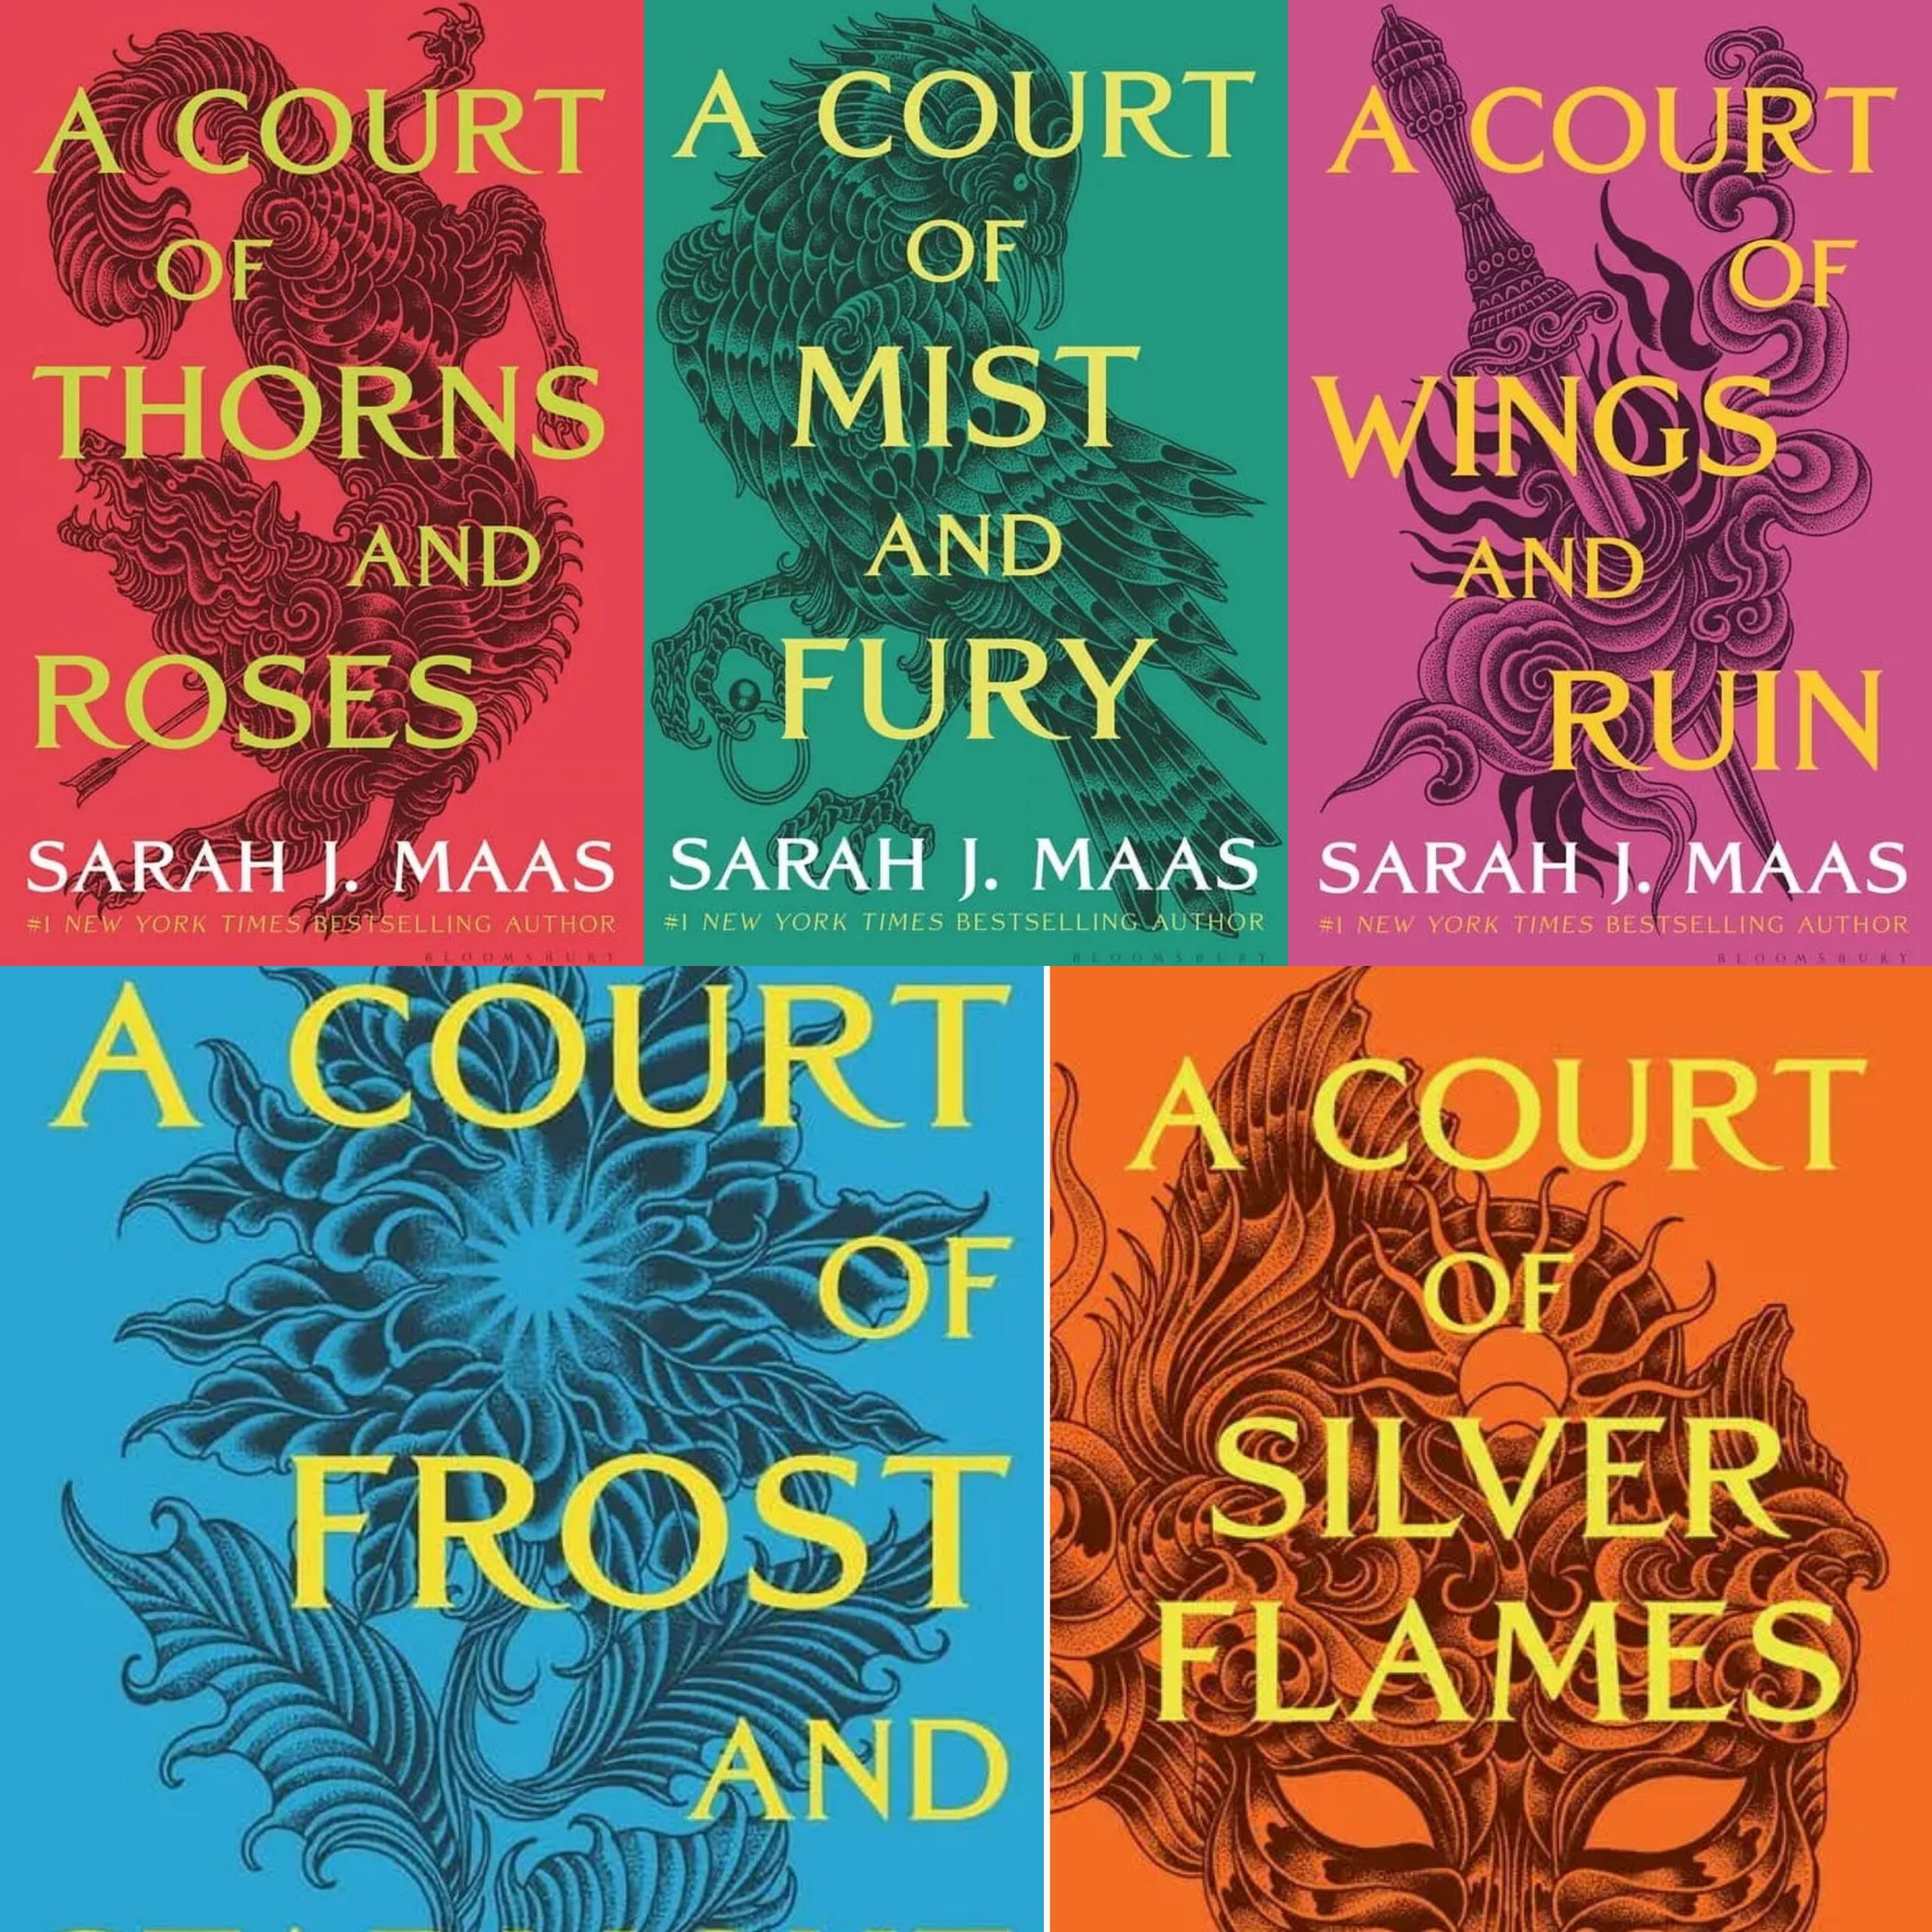 A Court of Thrones and Roses Books Ranked